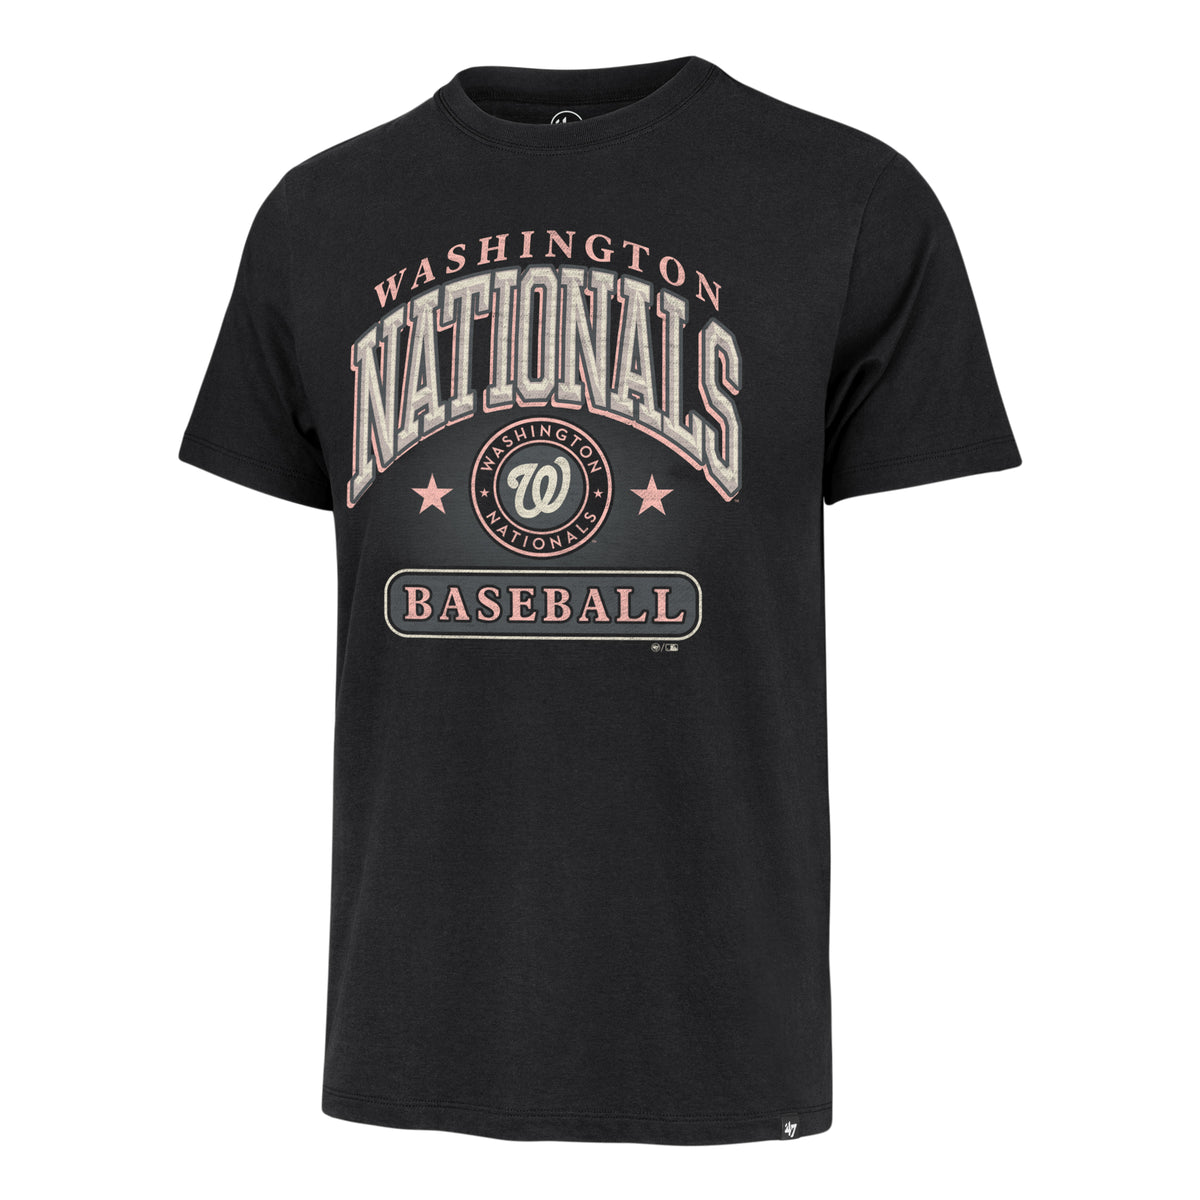 WASHINGTON NATIONALS CITY CONNECT ELEMENTS '47 FRANKLIN TEE